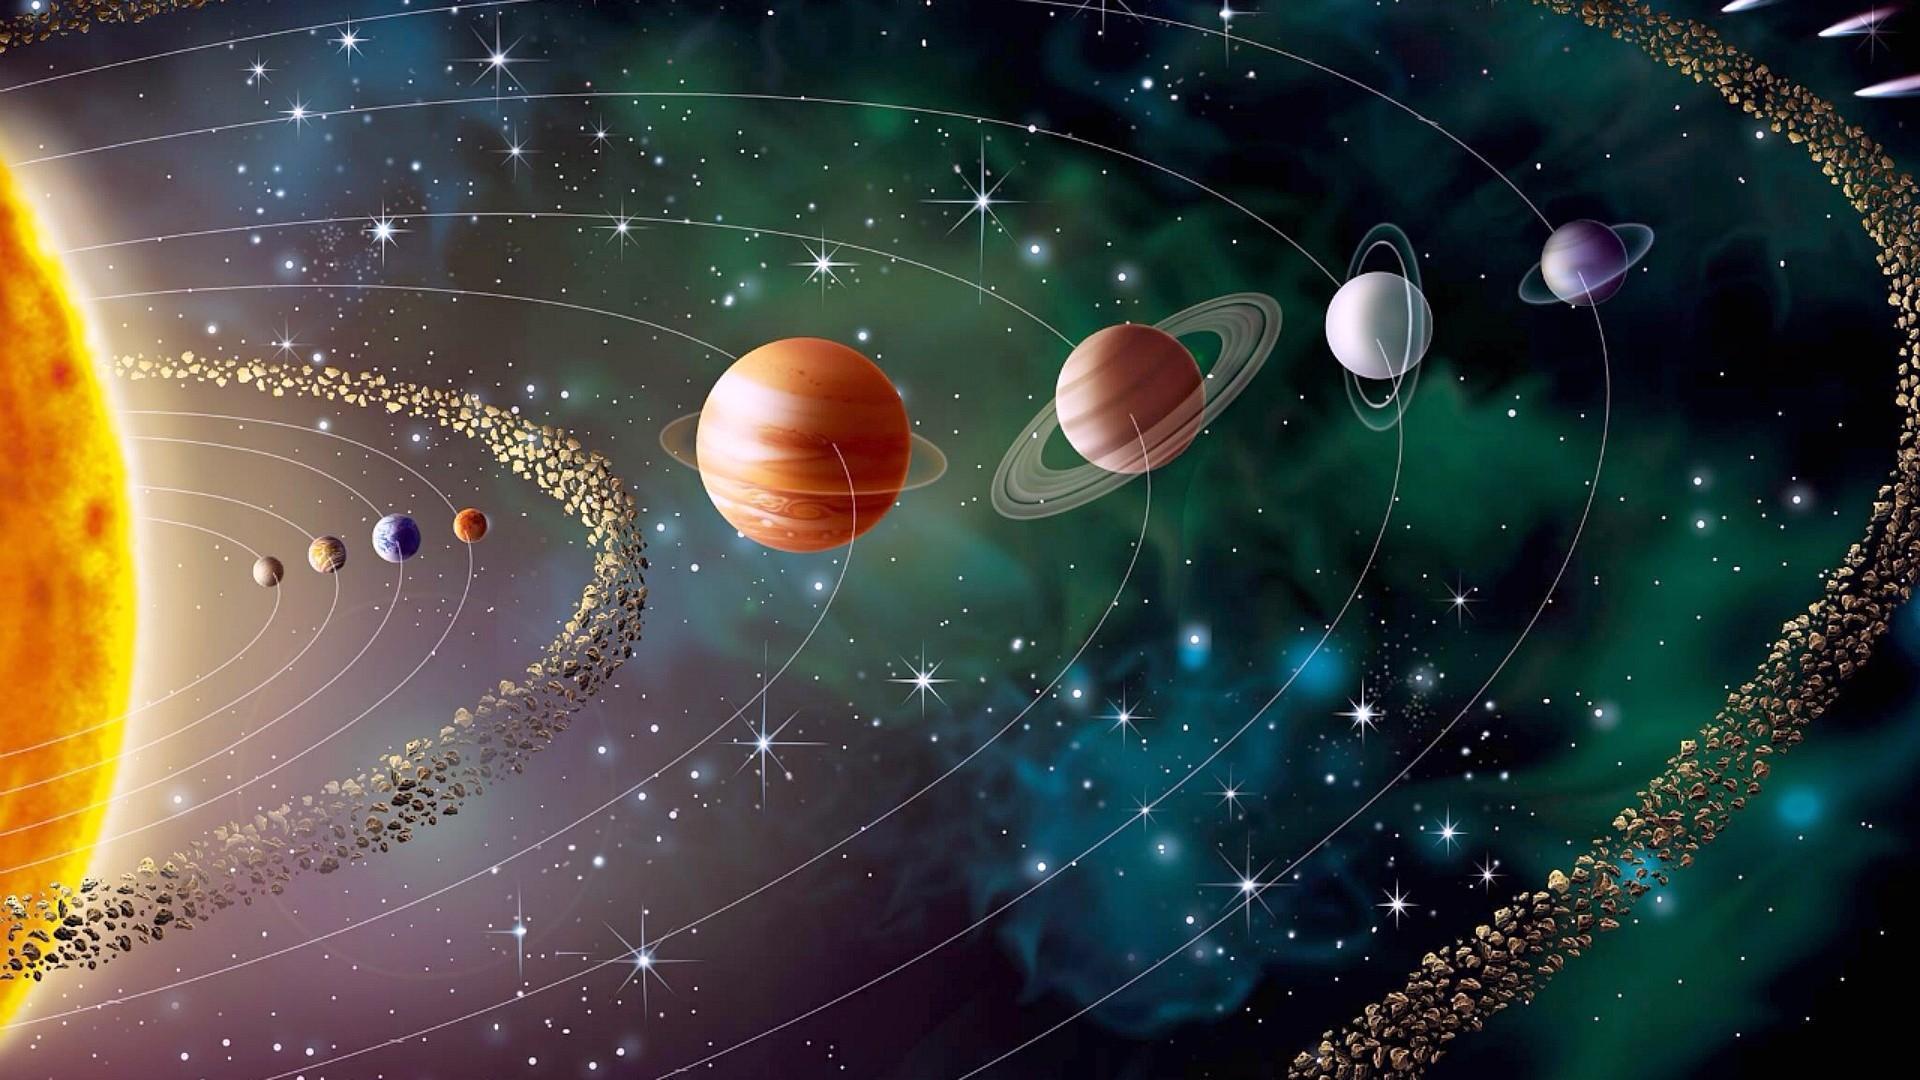 Wallpapers HD Solar System - Wallpaper Cave